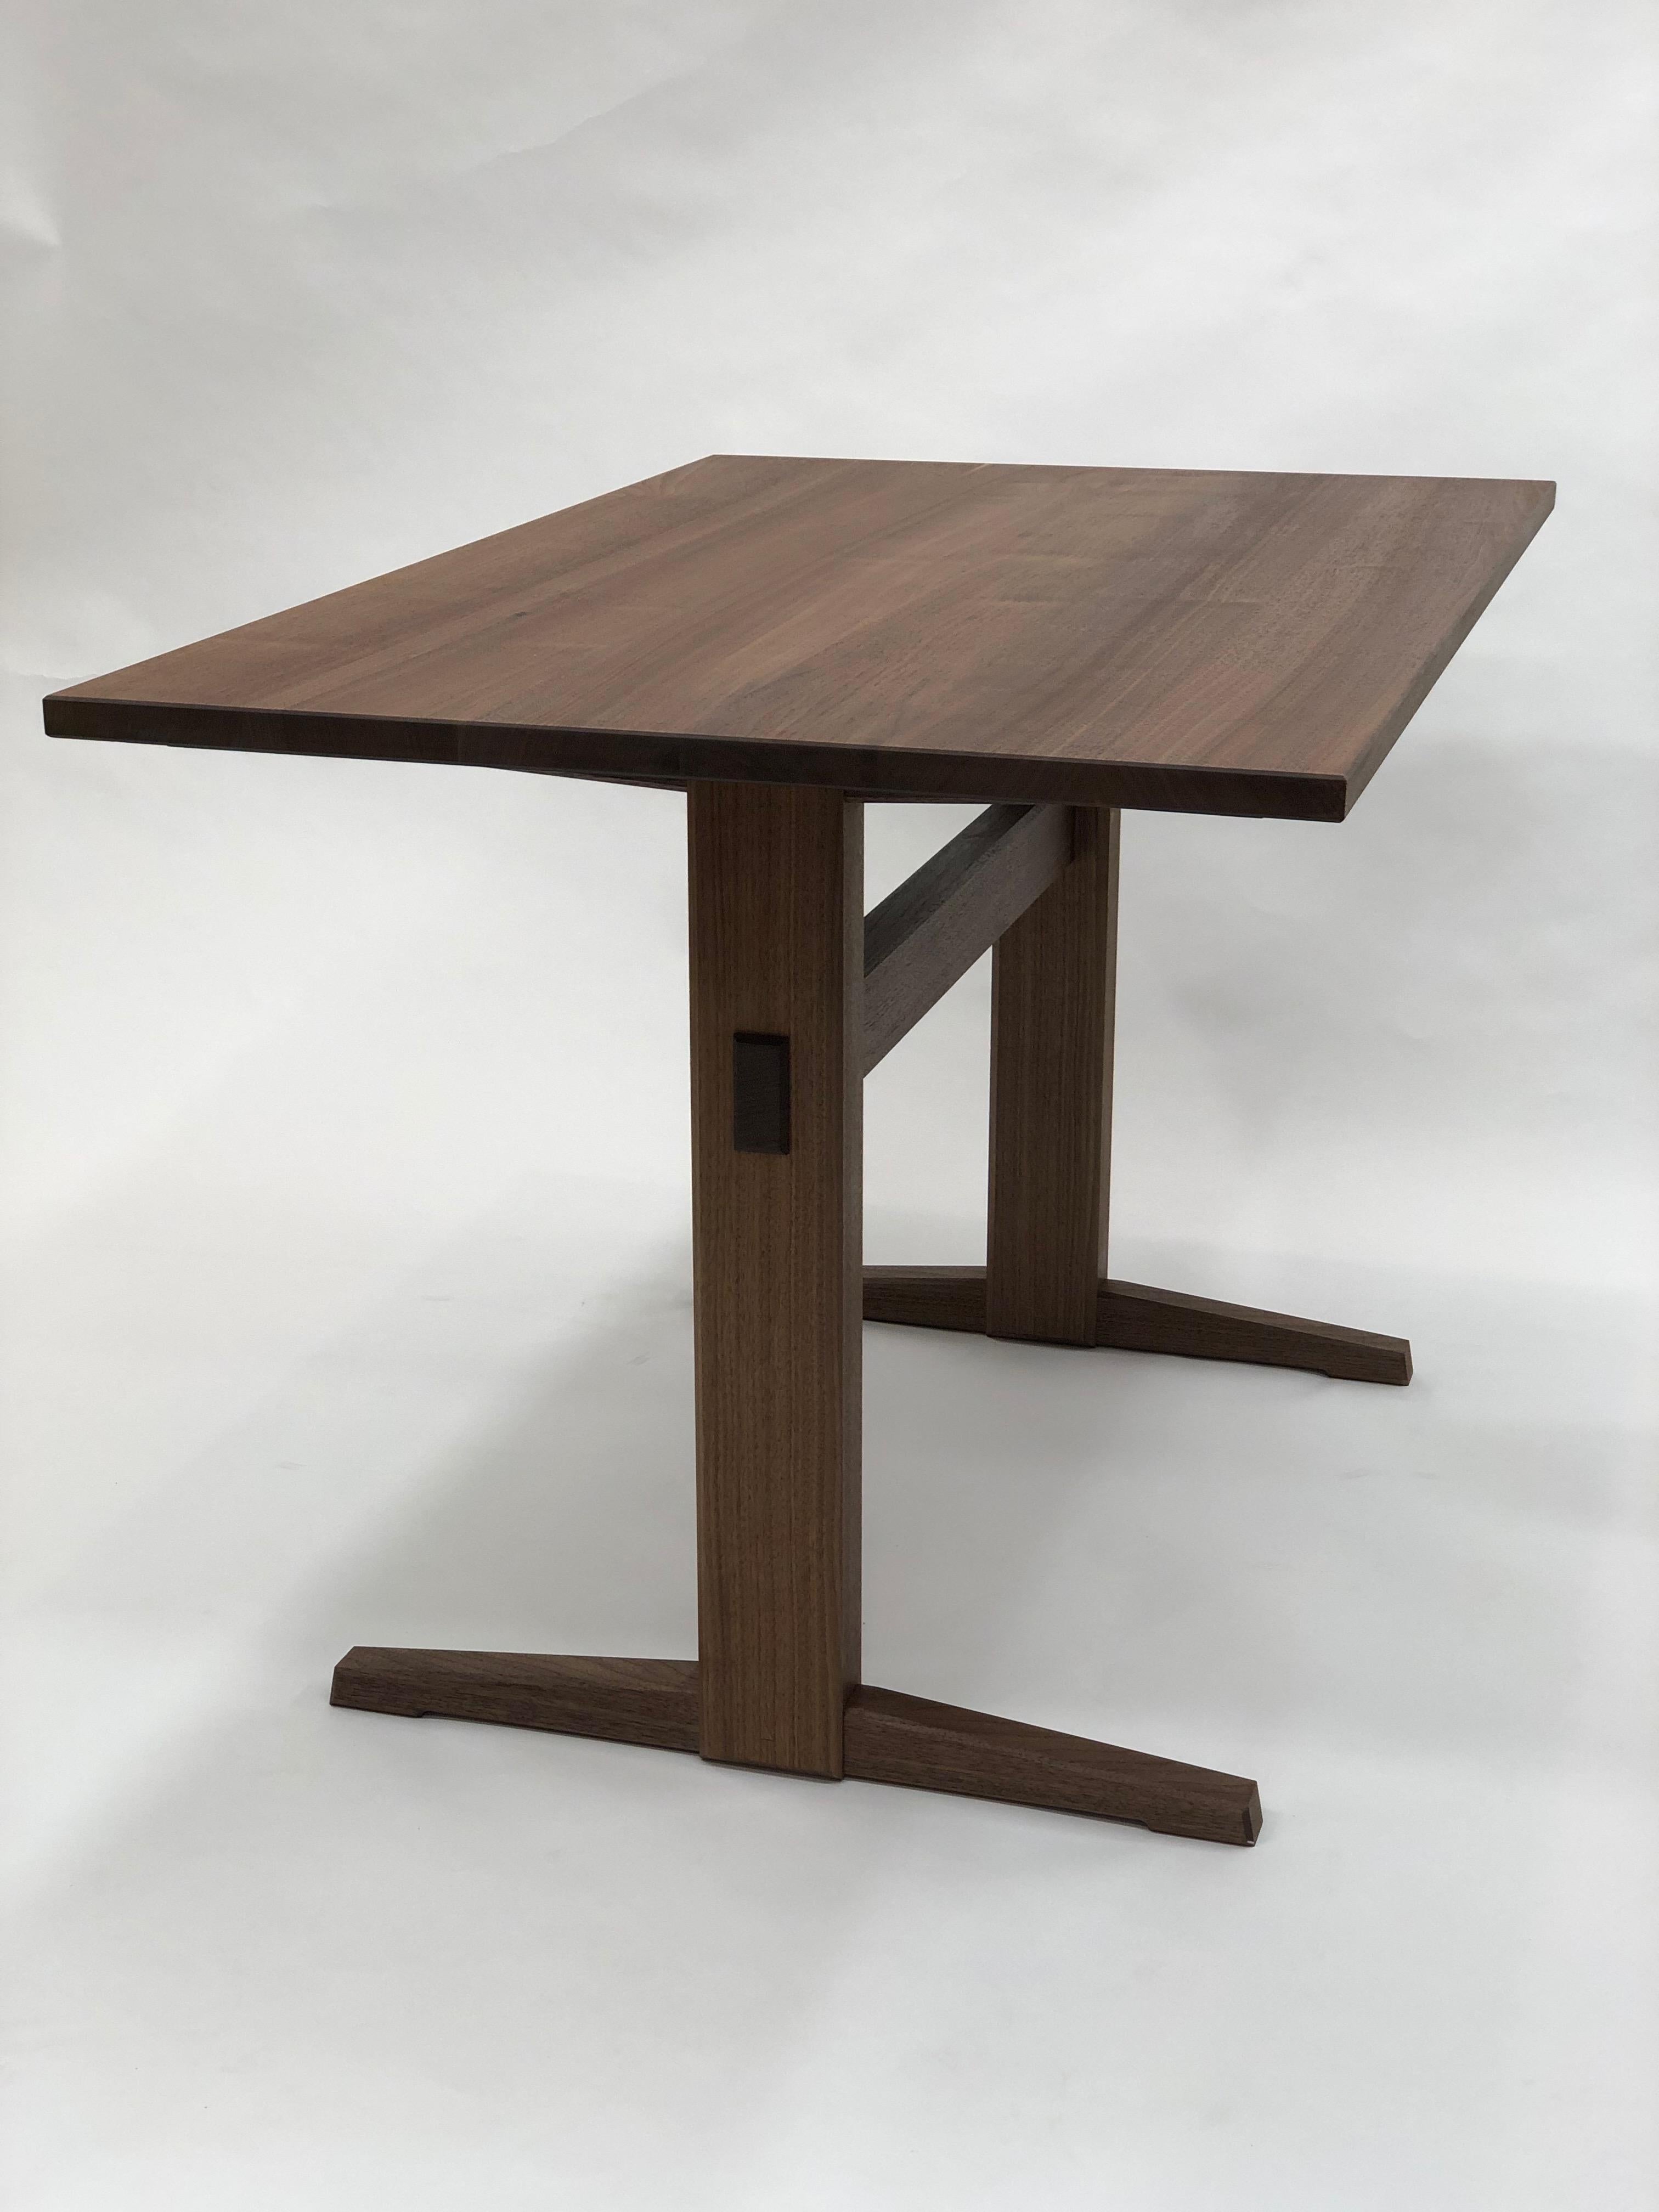 American Trestle Base Dining Table in Quartersawn Walnut by Brian Holcombe For Sale